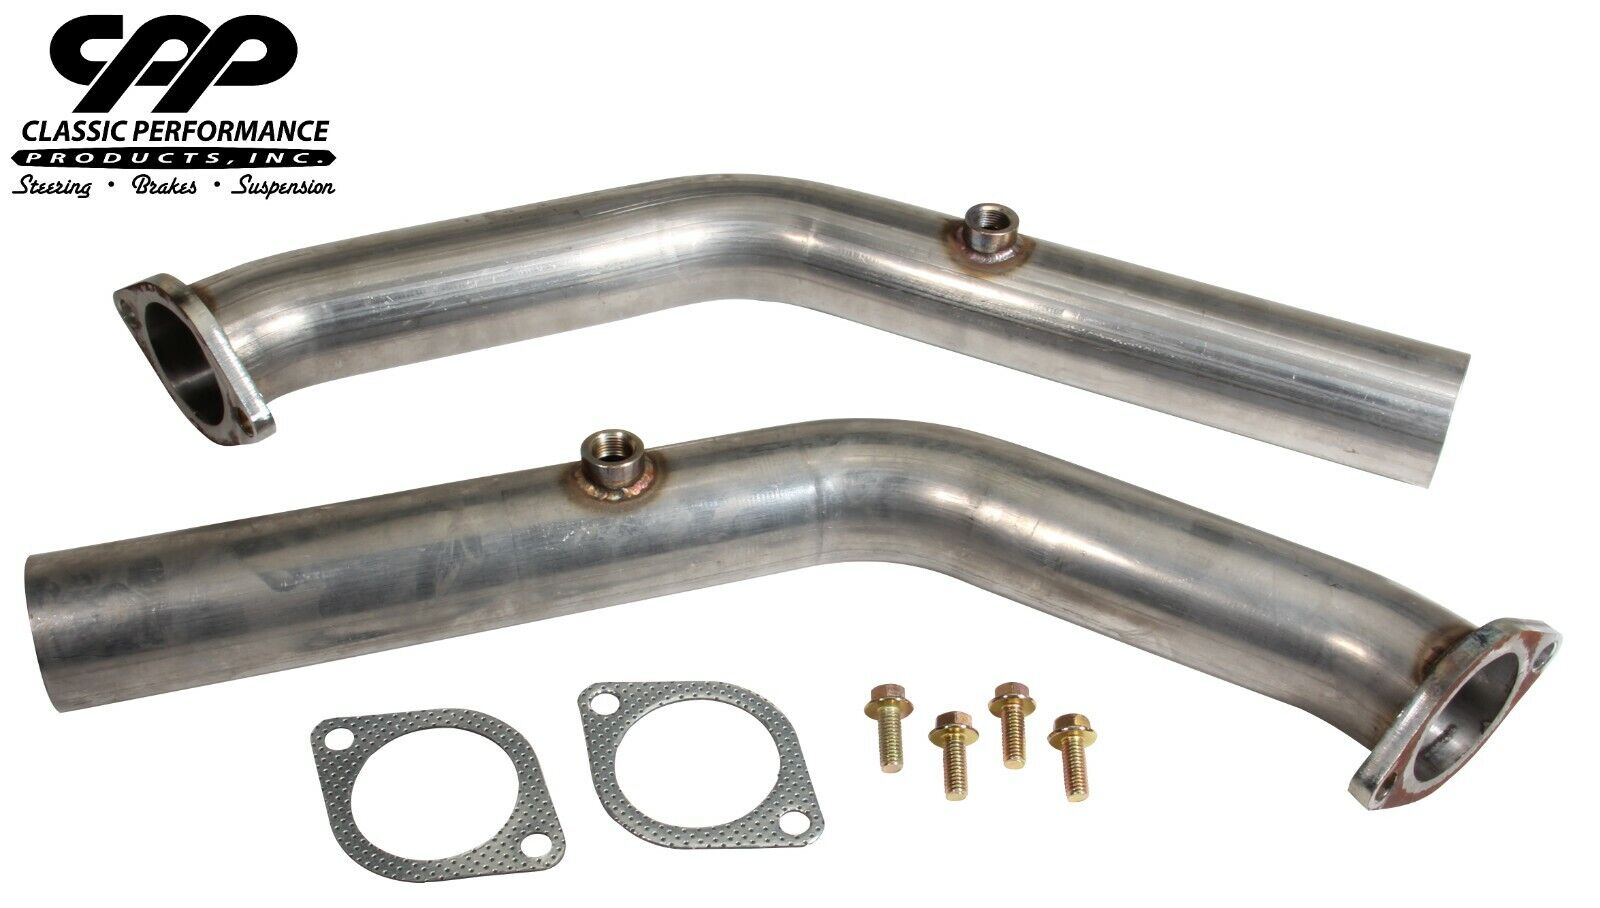 1964-72 Chevy Chevelle El Camino LS Swap Conversion Exhaust Manifold Head Pipes